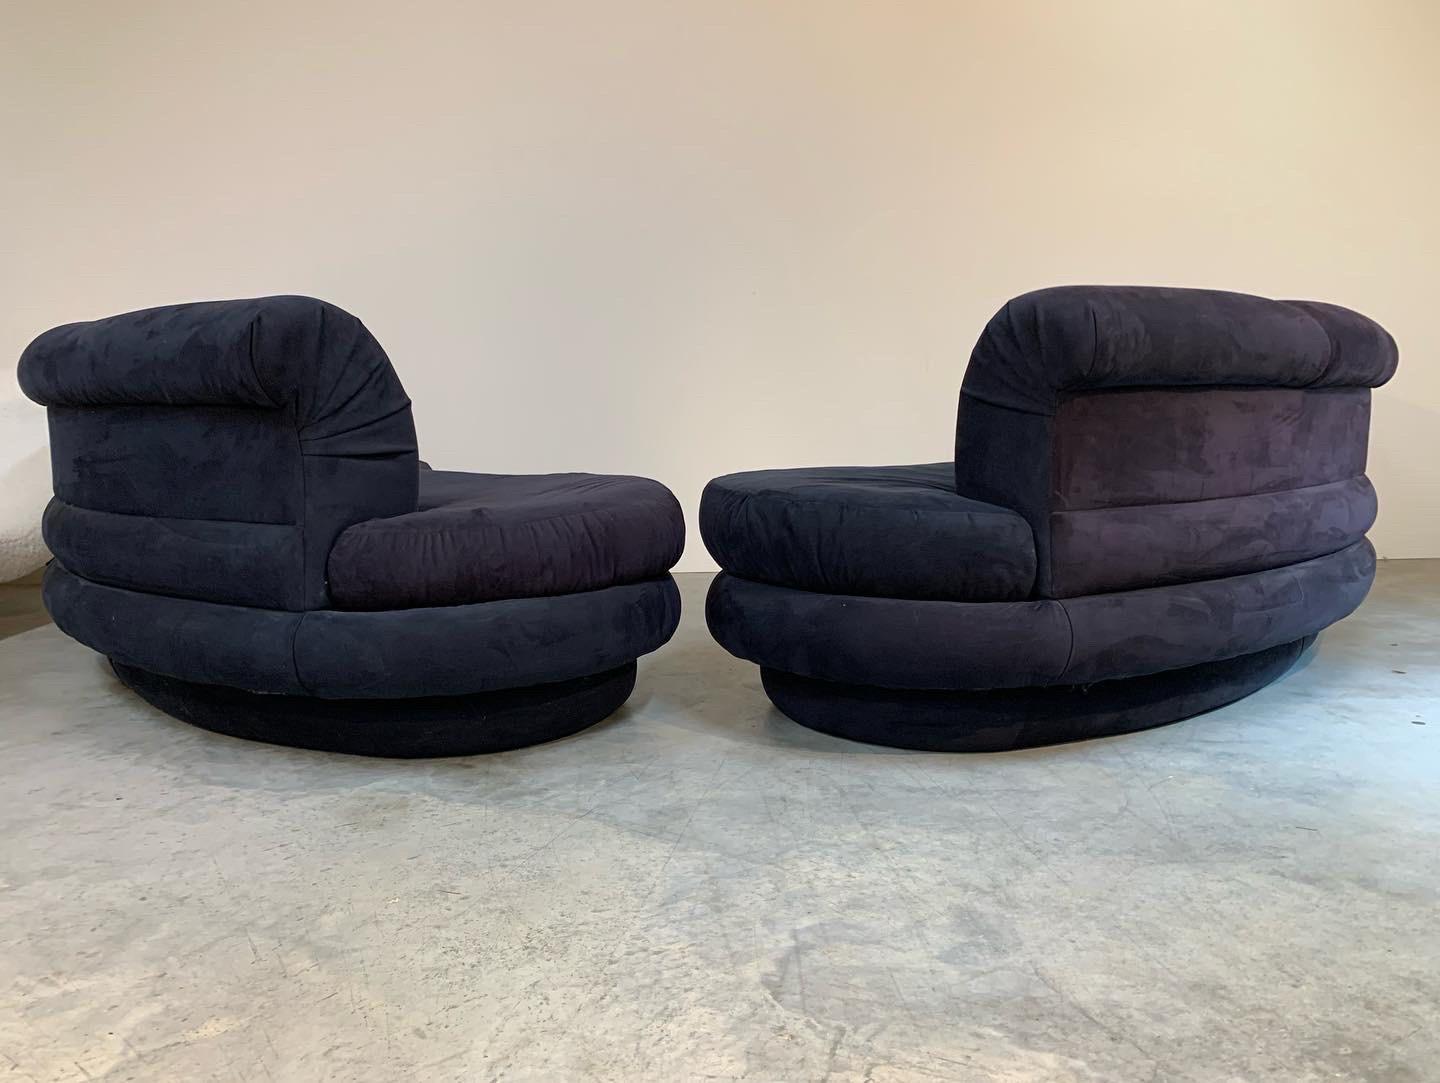 Late 20th Century Matched Pair of Curved Kidney Sofas Attributed to Kagan For Directional 